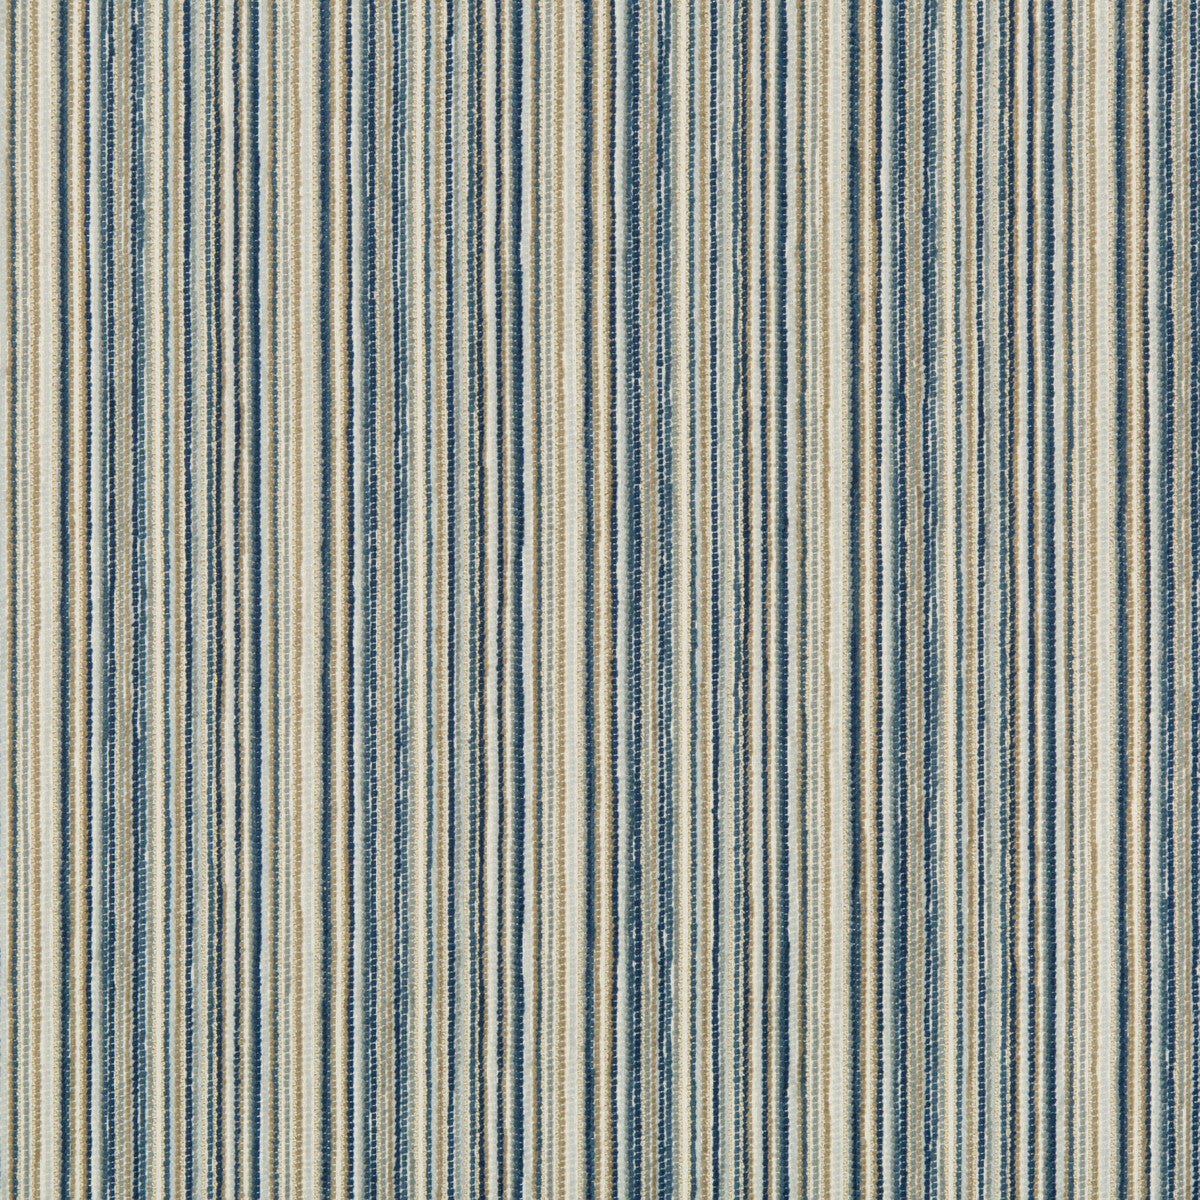 Kravet Contract fabric in 34740-516 color - pattern 34740.516.0 - by Kravet Contract in the Incase Crypton Gis collection